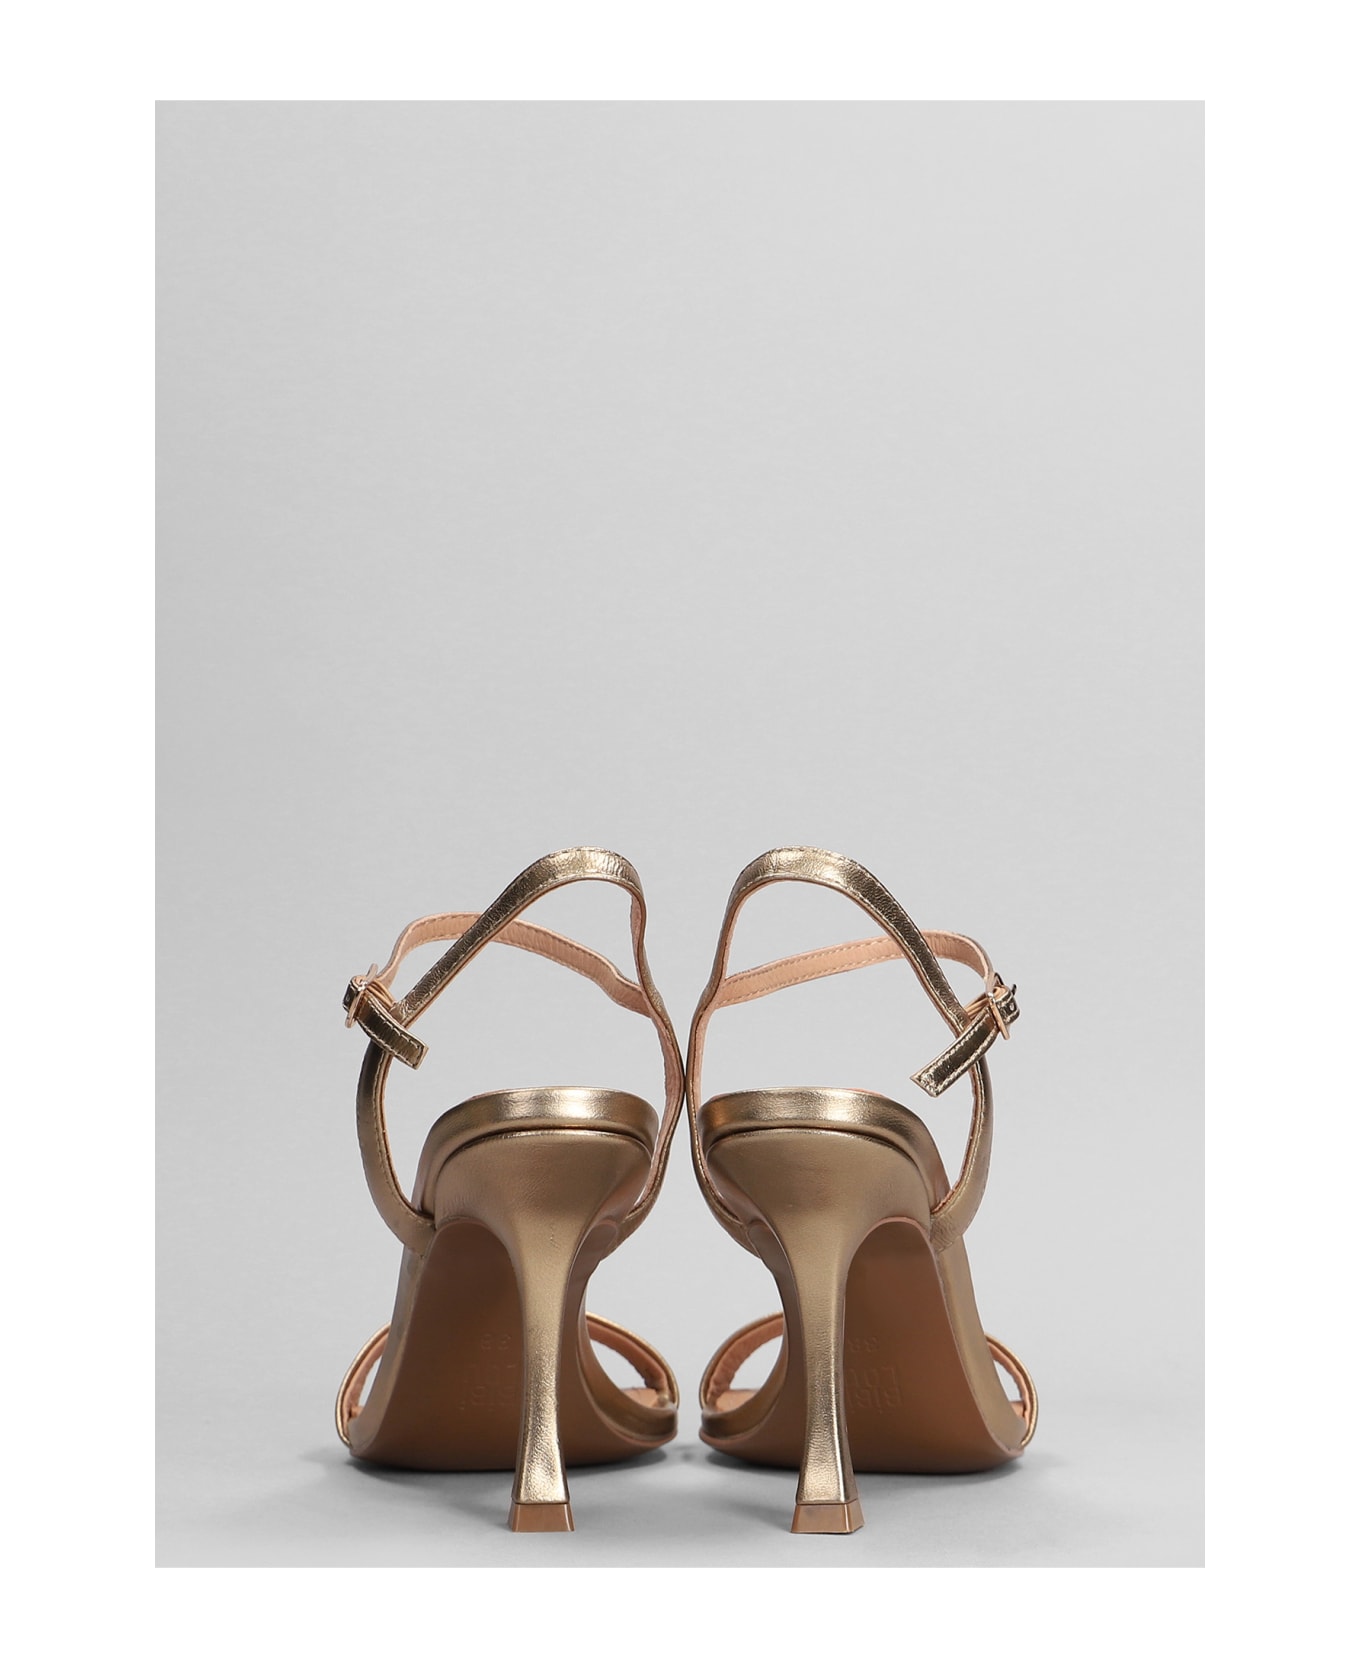 Bibi Lou Lotus 85 Sandals In Gold Leather - gold